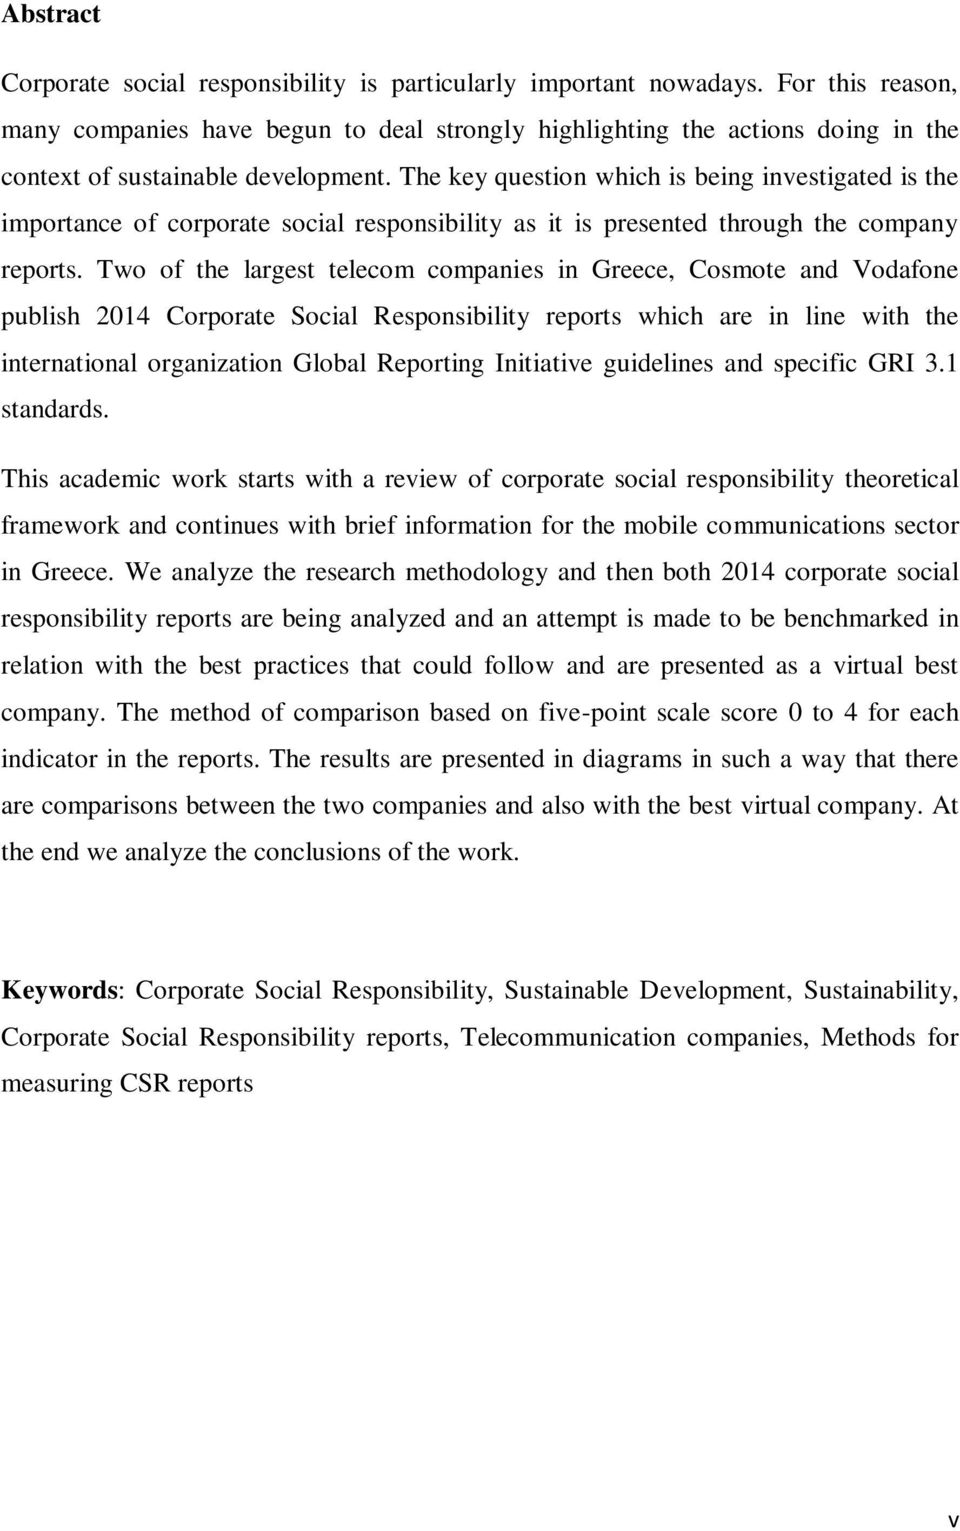 The key question which is being investigated is the importance of corporate social responsibility as it is presented through the company reports.